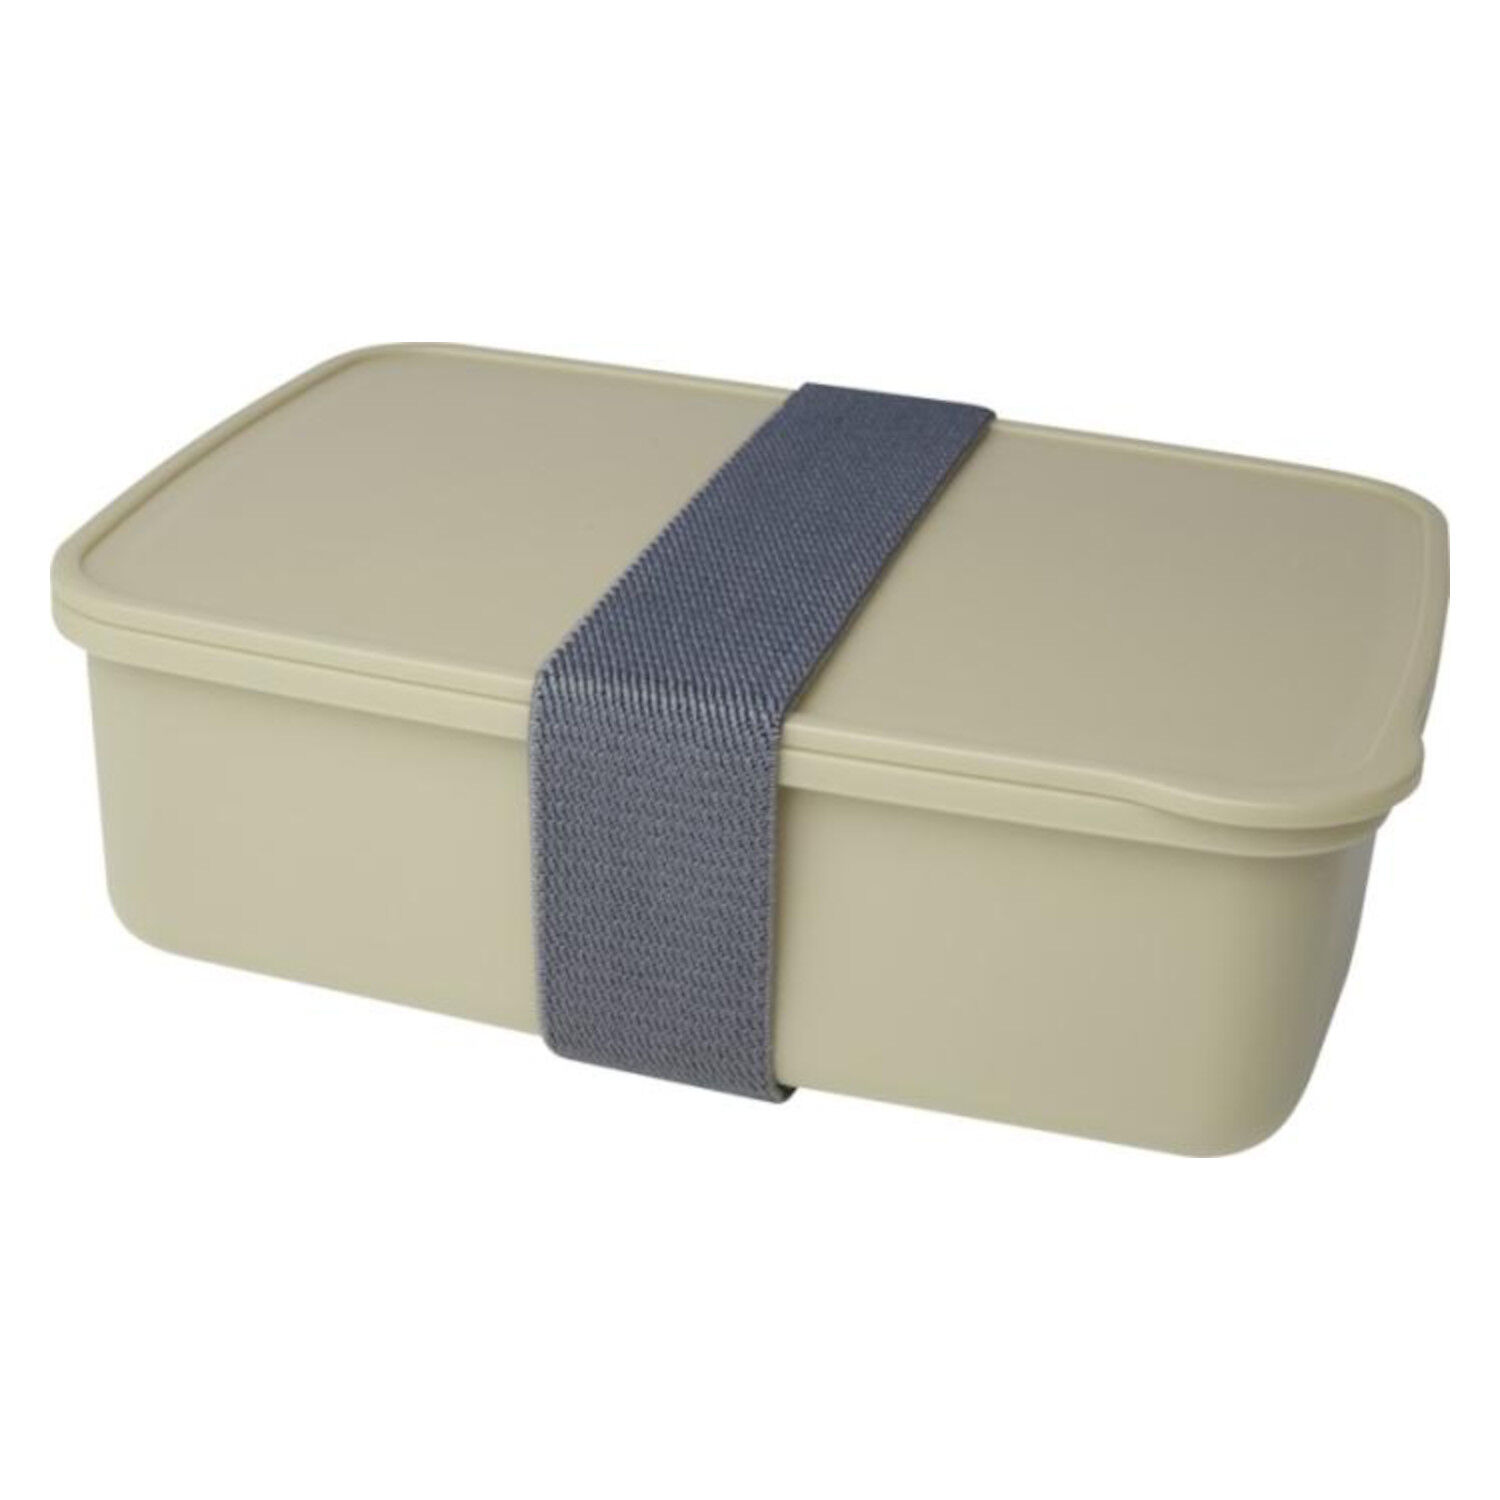 Dovi Recycled Plastic Lunch Box (beige)